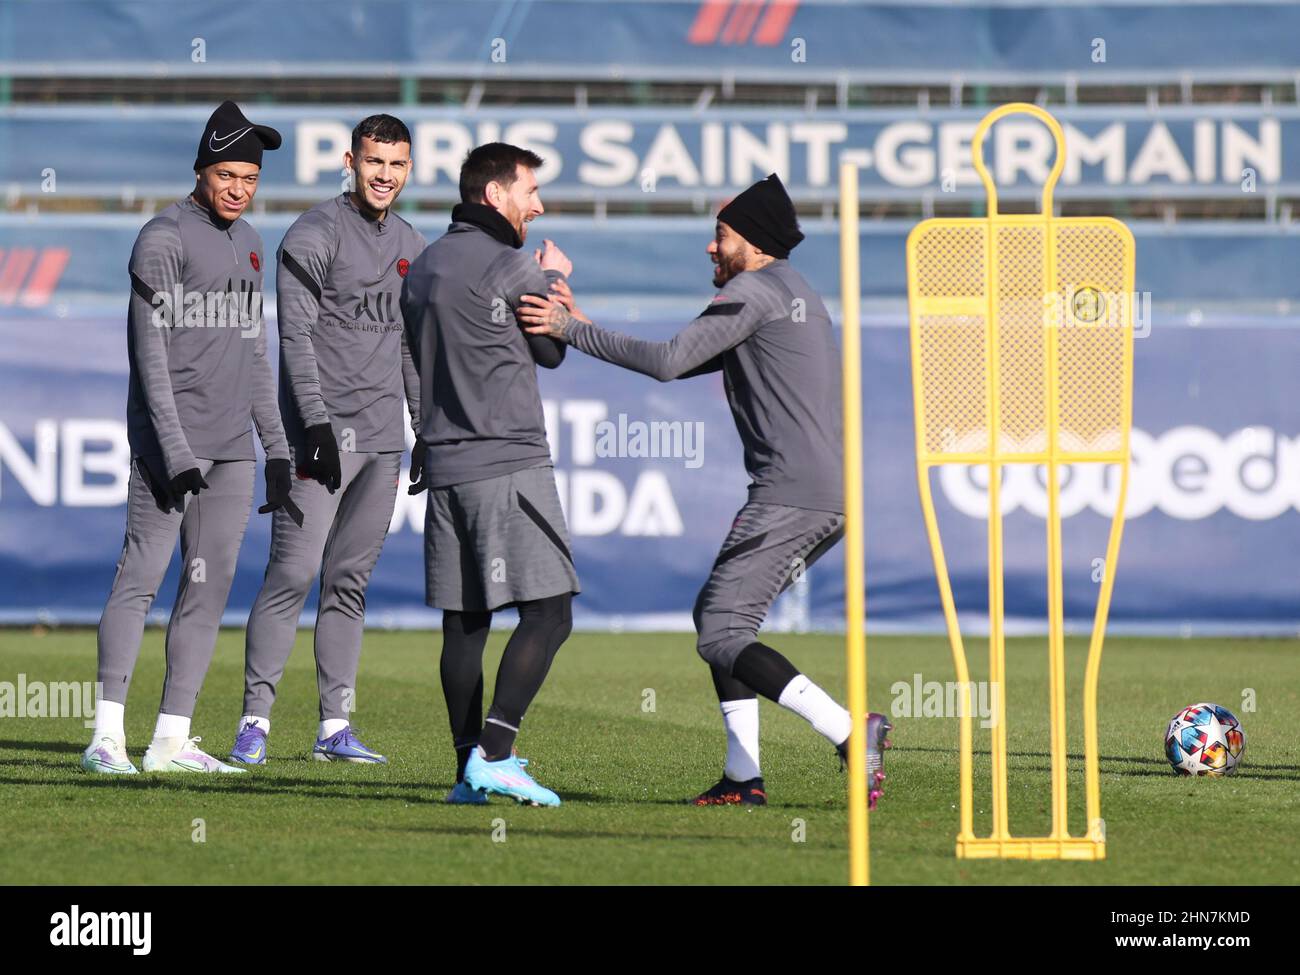 Paris, France. 14th Feb, 2022. Paris Saint-Germain's Kylian Mbappe (1st L), Lionel Messi (2nd R), Neymar (1st R) attend a training session in Paris, France on Feb. 14, 2022, the eve of the UEFA Champions League round of 16 football match between PSG and Real Madrid. Credit: Gao Jing/Xinhua/Alamy Live News Stock Photo